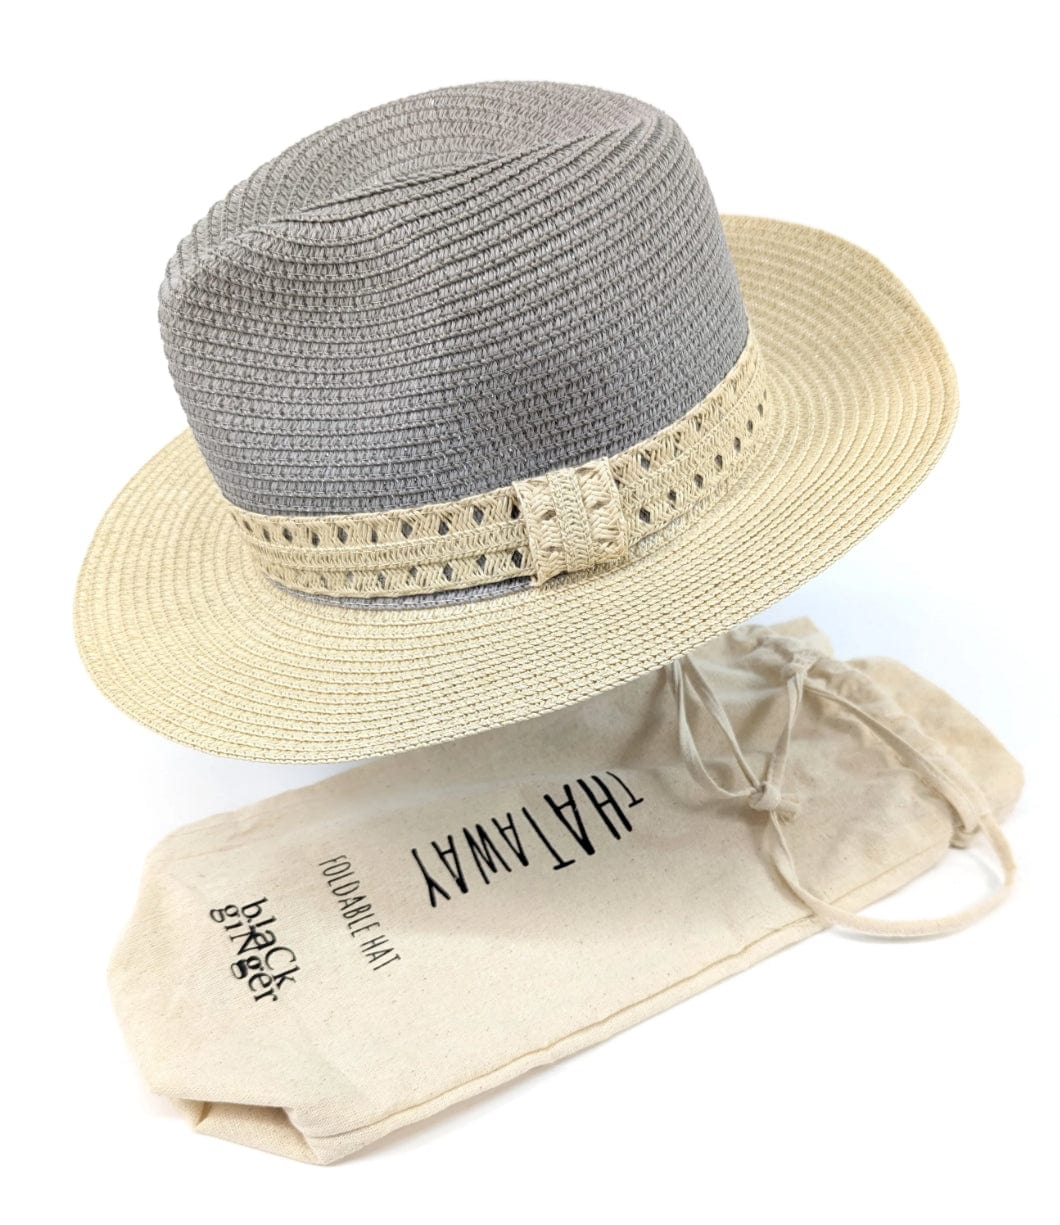 Vintage Style Packable Panama Hat , Two Tone Grey And Natural , Foldable Travel Hat .